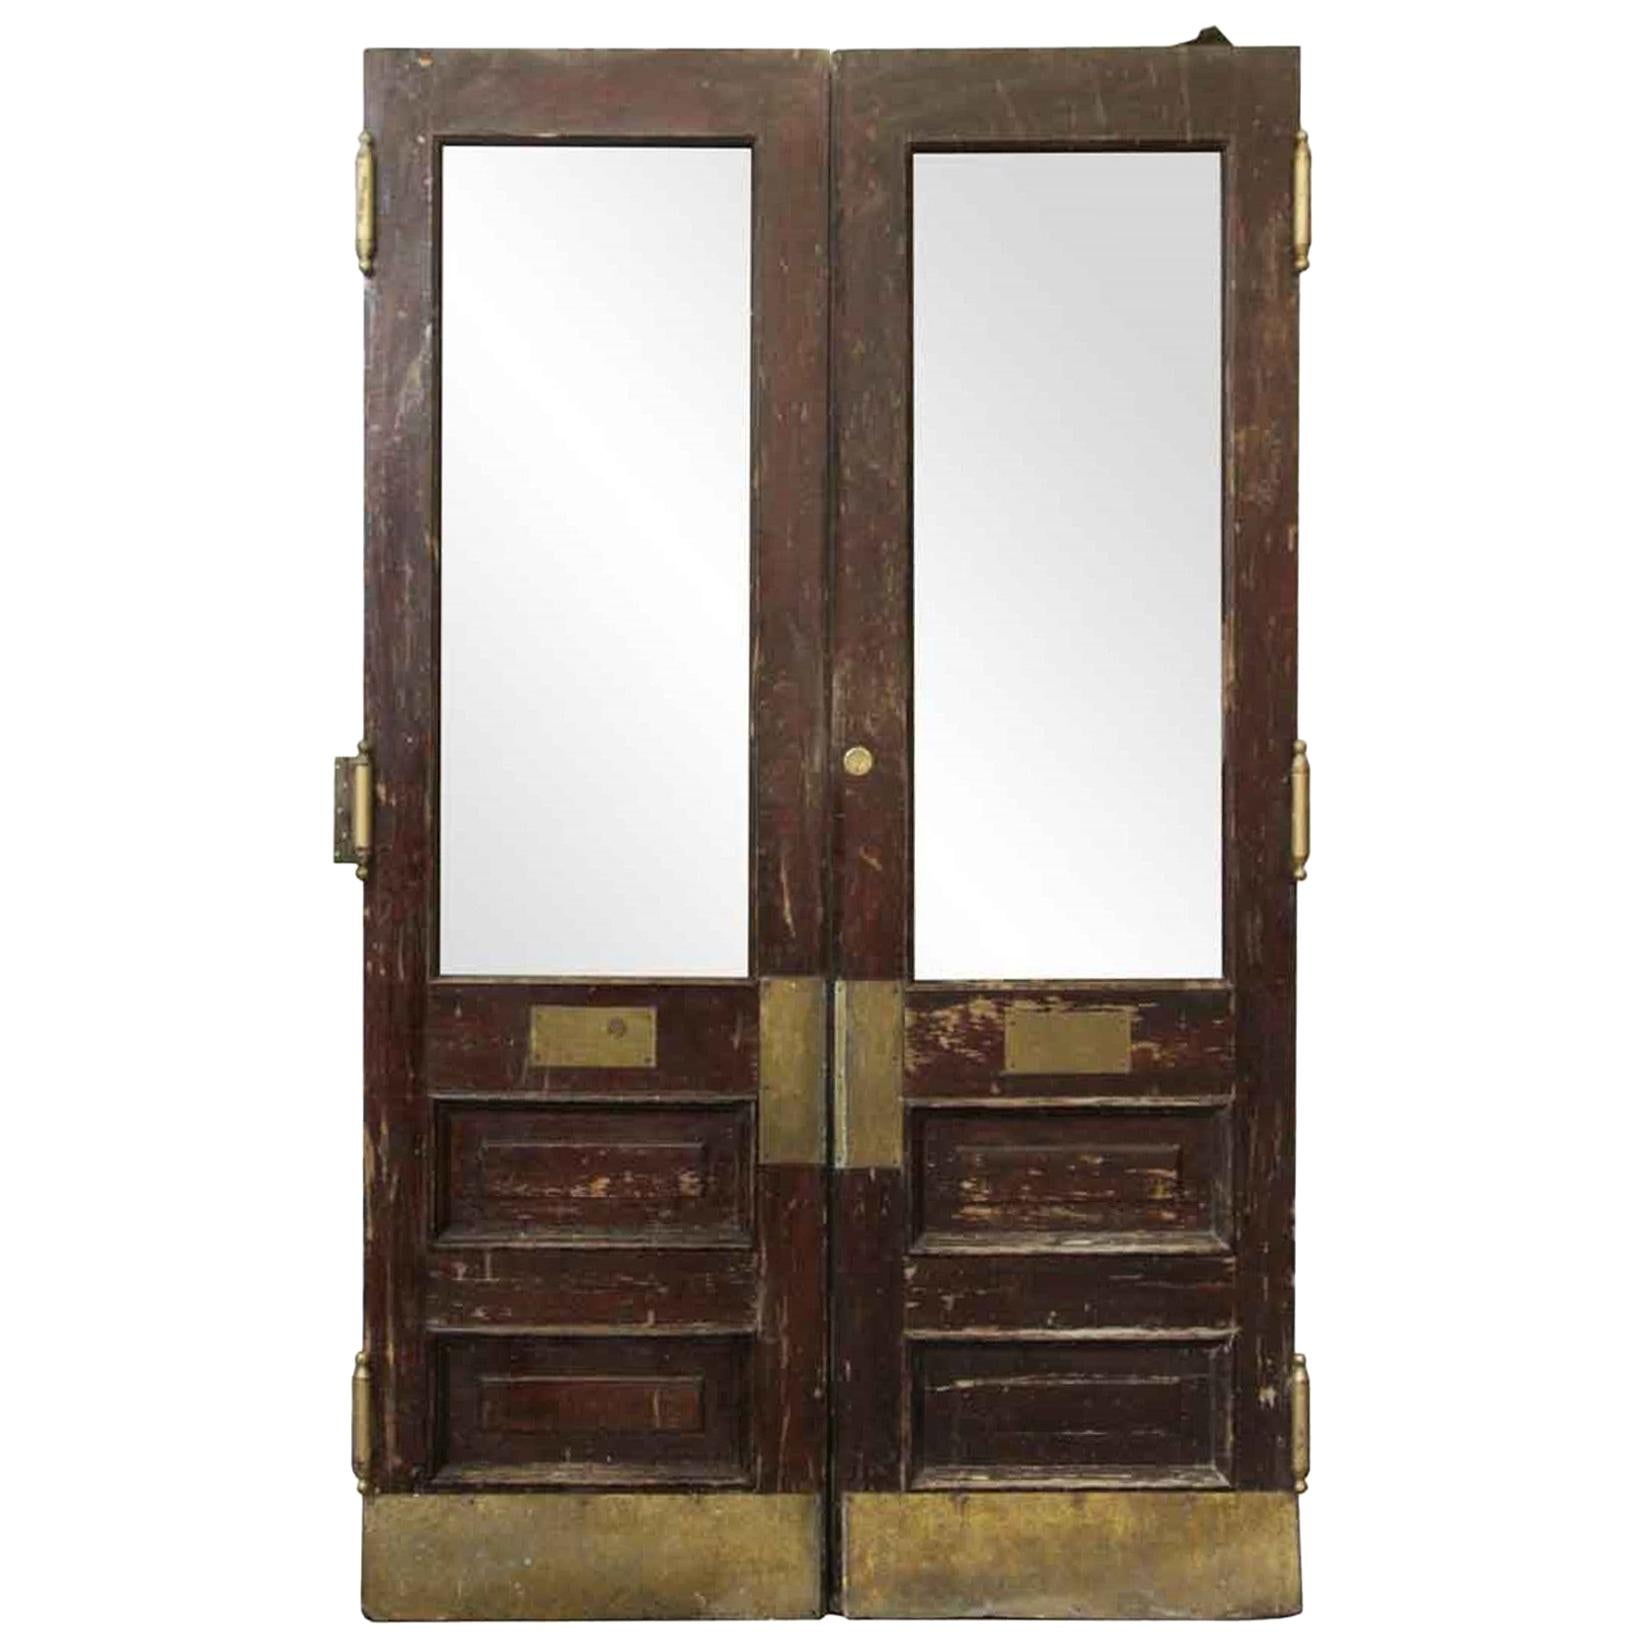 1890s Pair Antique Wood and Glass Swinging Doors Brownstone